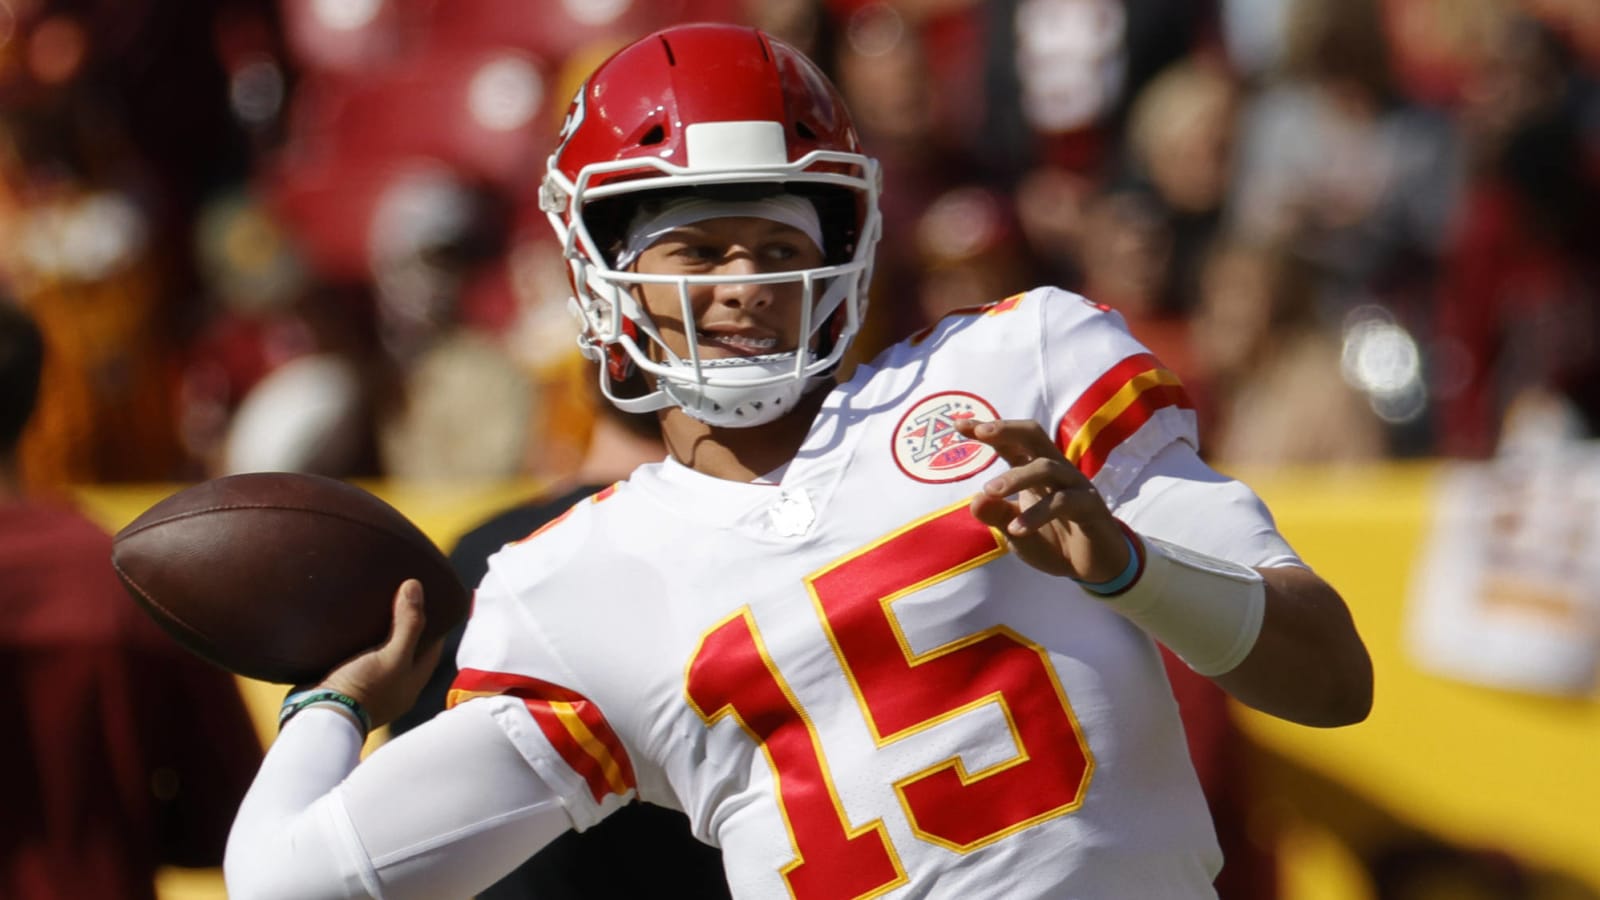 Patrick Mahomes' mom lobbies for rule change after his INT